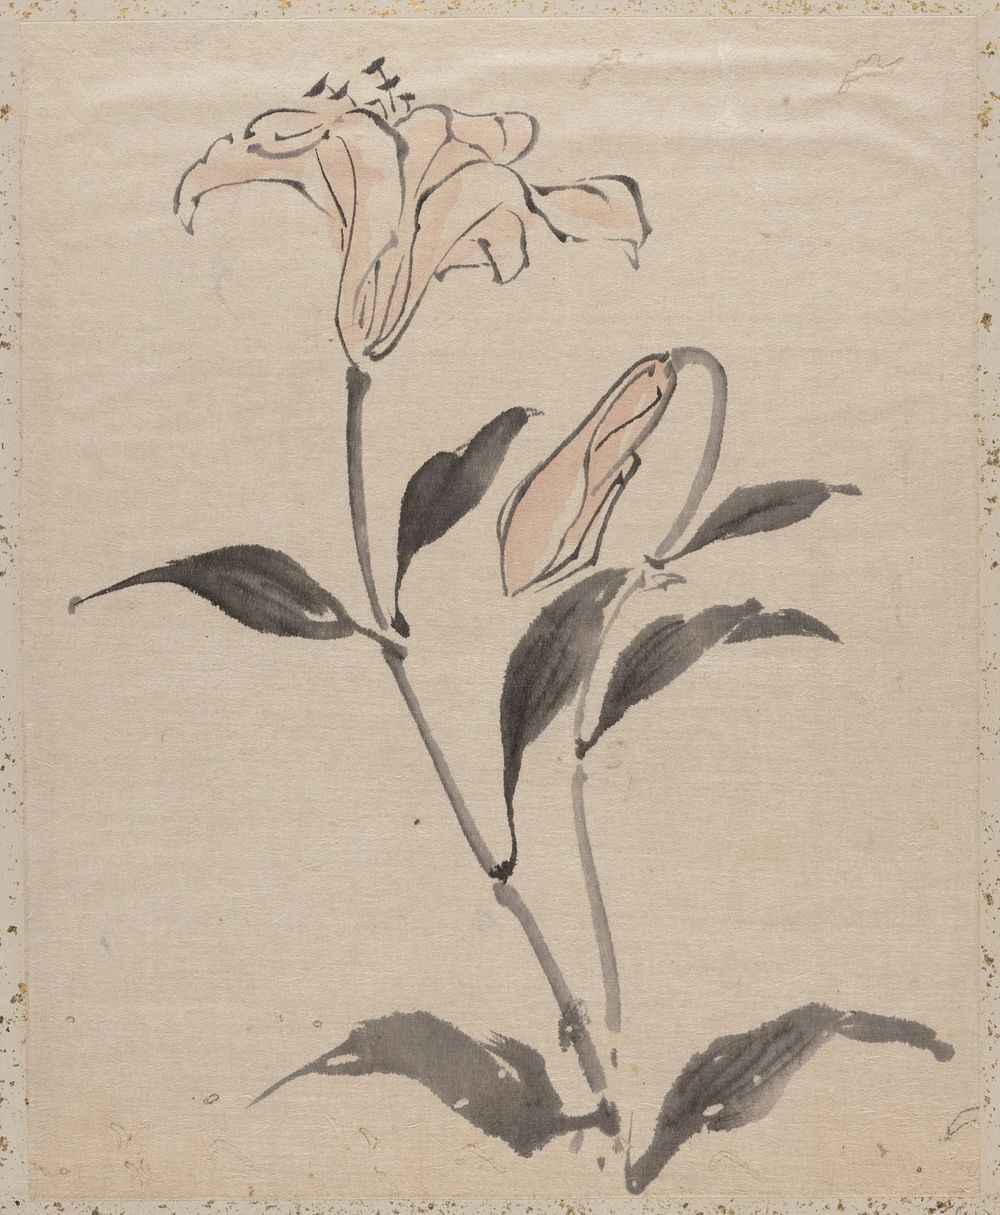 Flower, Album of Sketches by Katsushika Hokusai and His Disciples. Original public domain image from the MET museum.